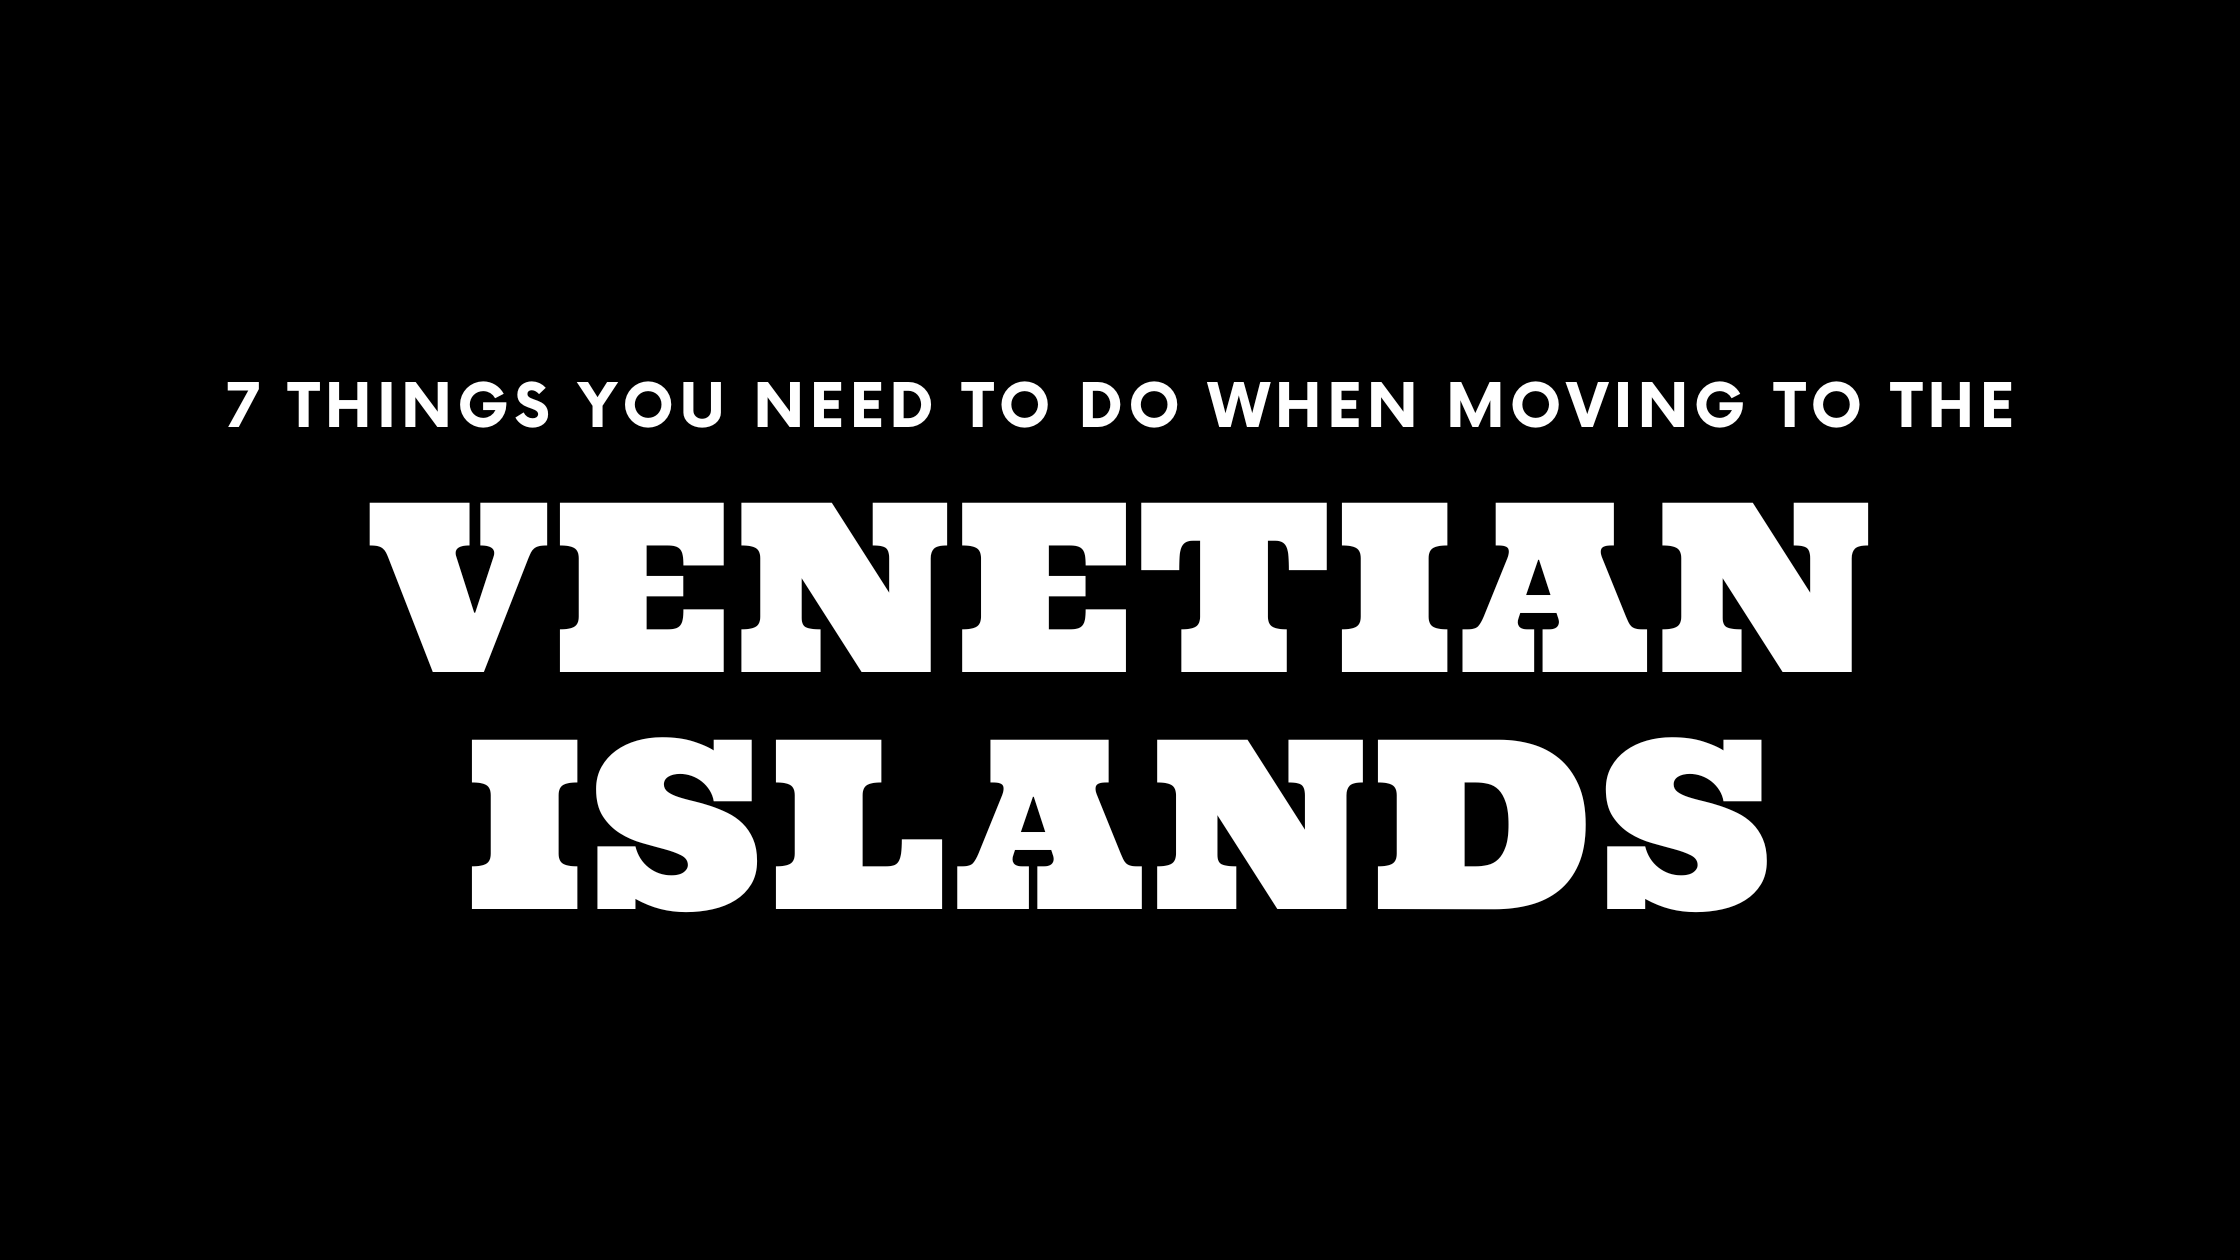 Moving to the Venetian Islands? 7 Things You Need To Do Immediately!